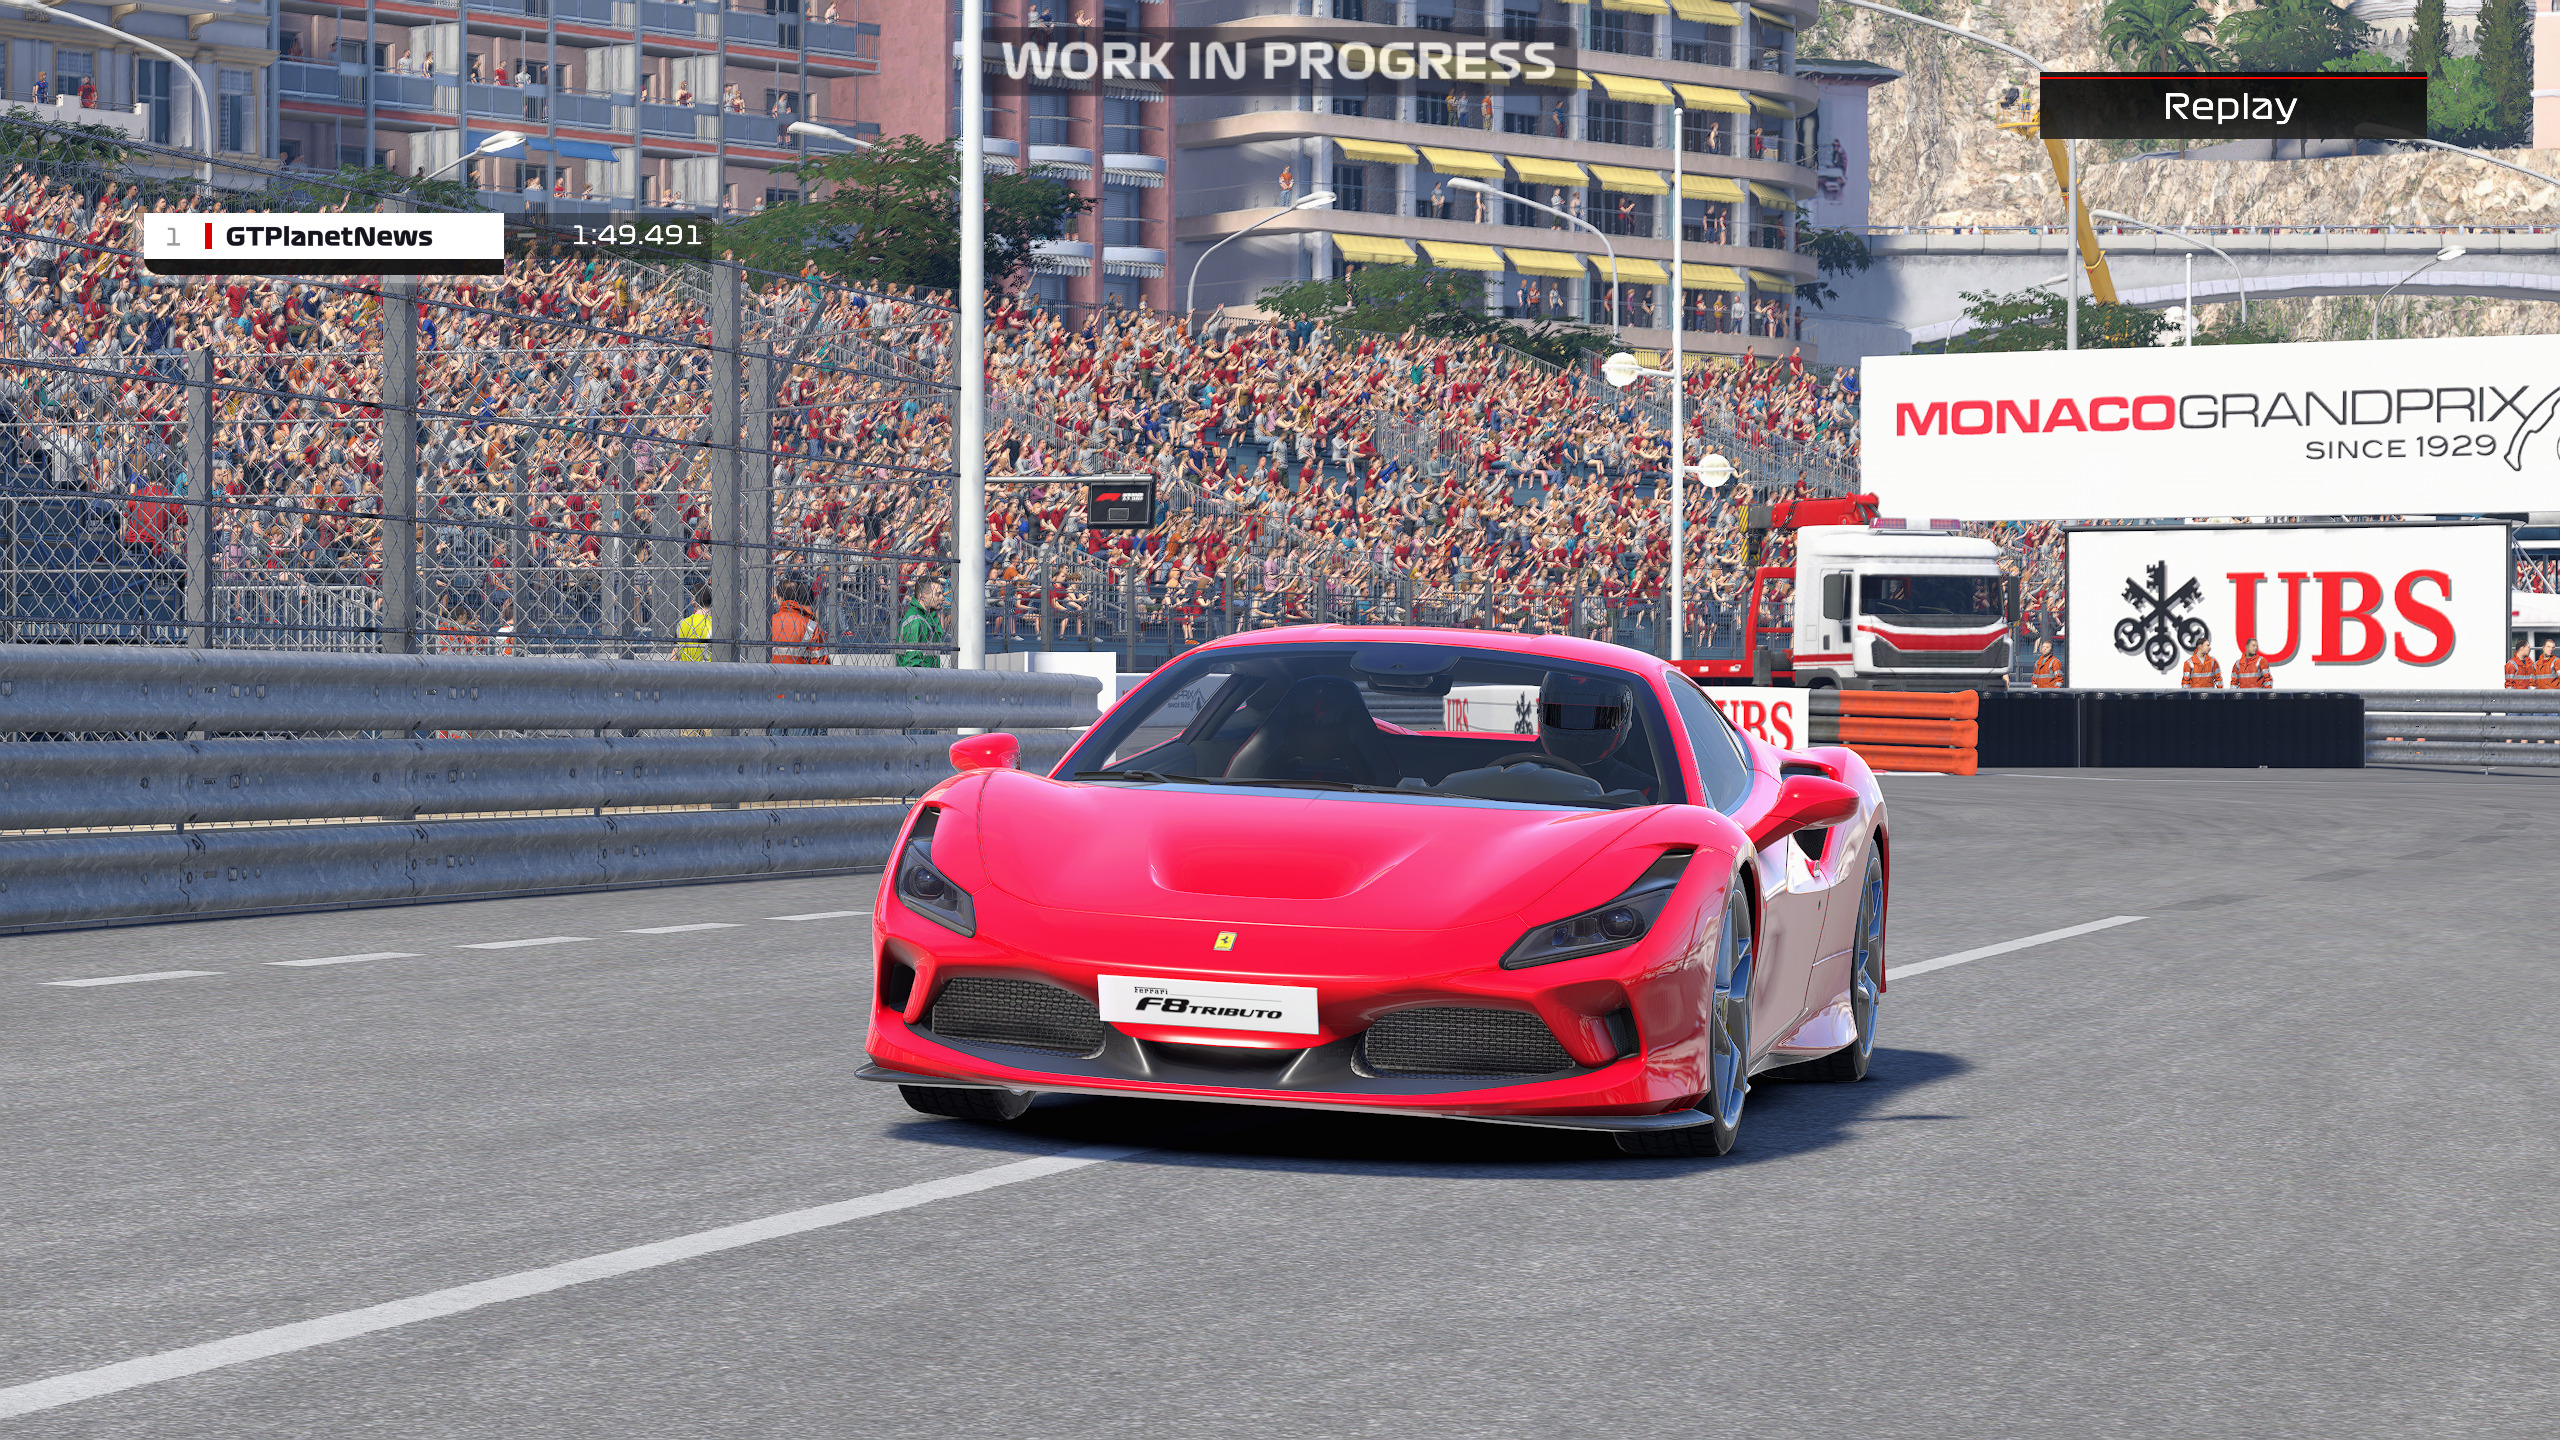 F1 2022 will reportedly include supercars and cross-play